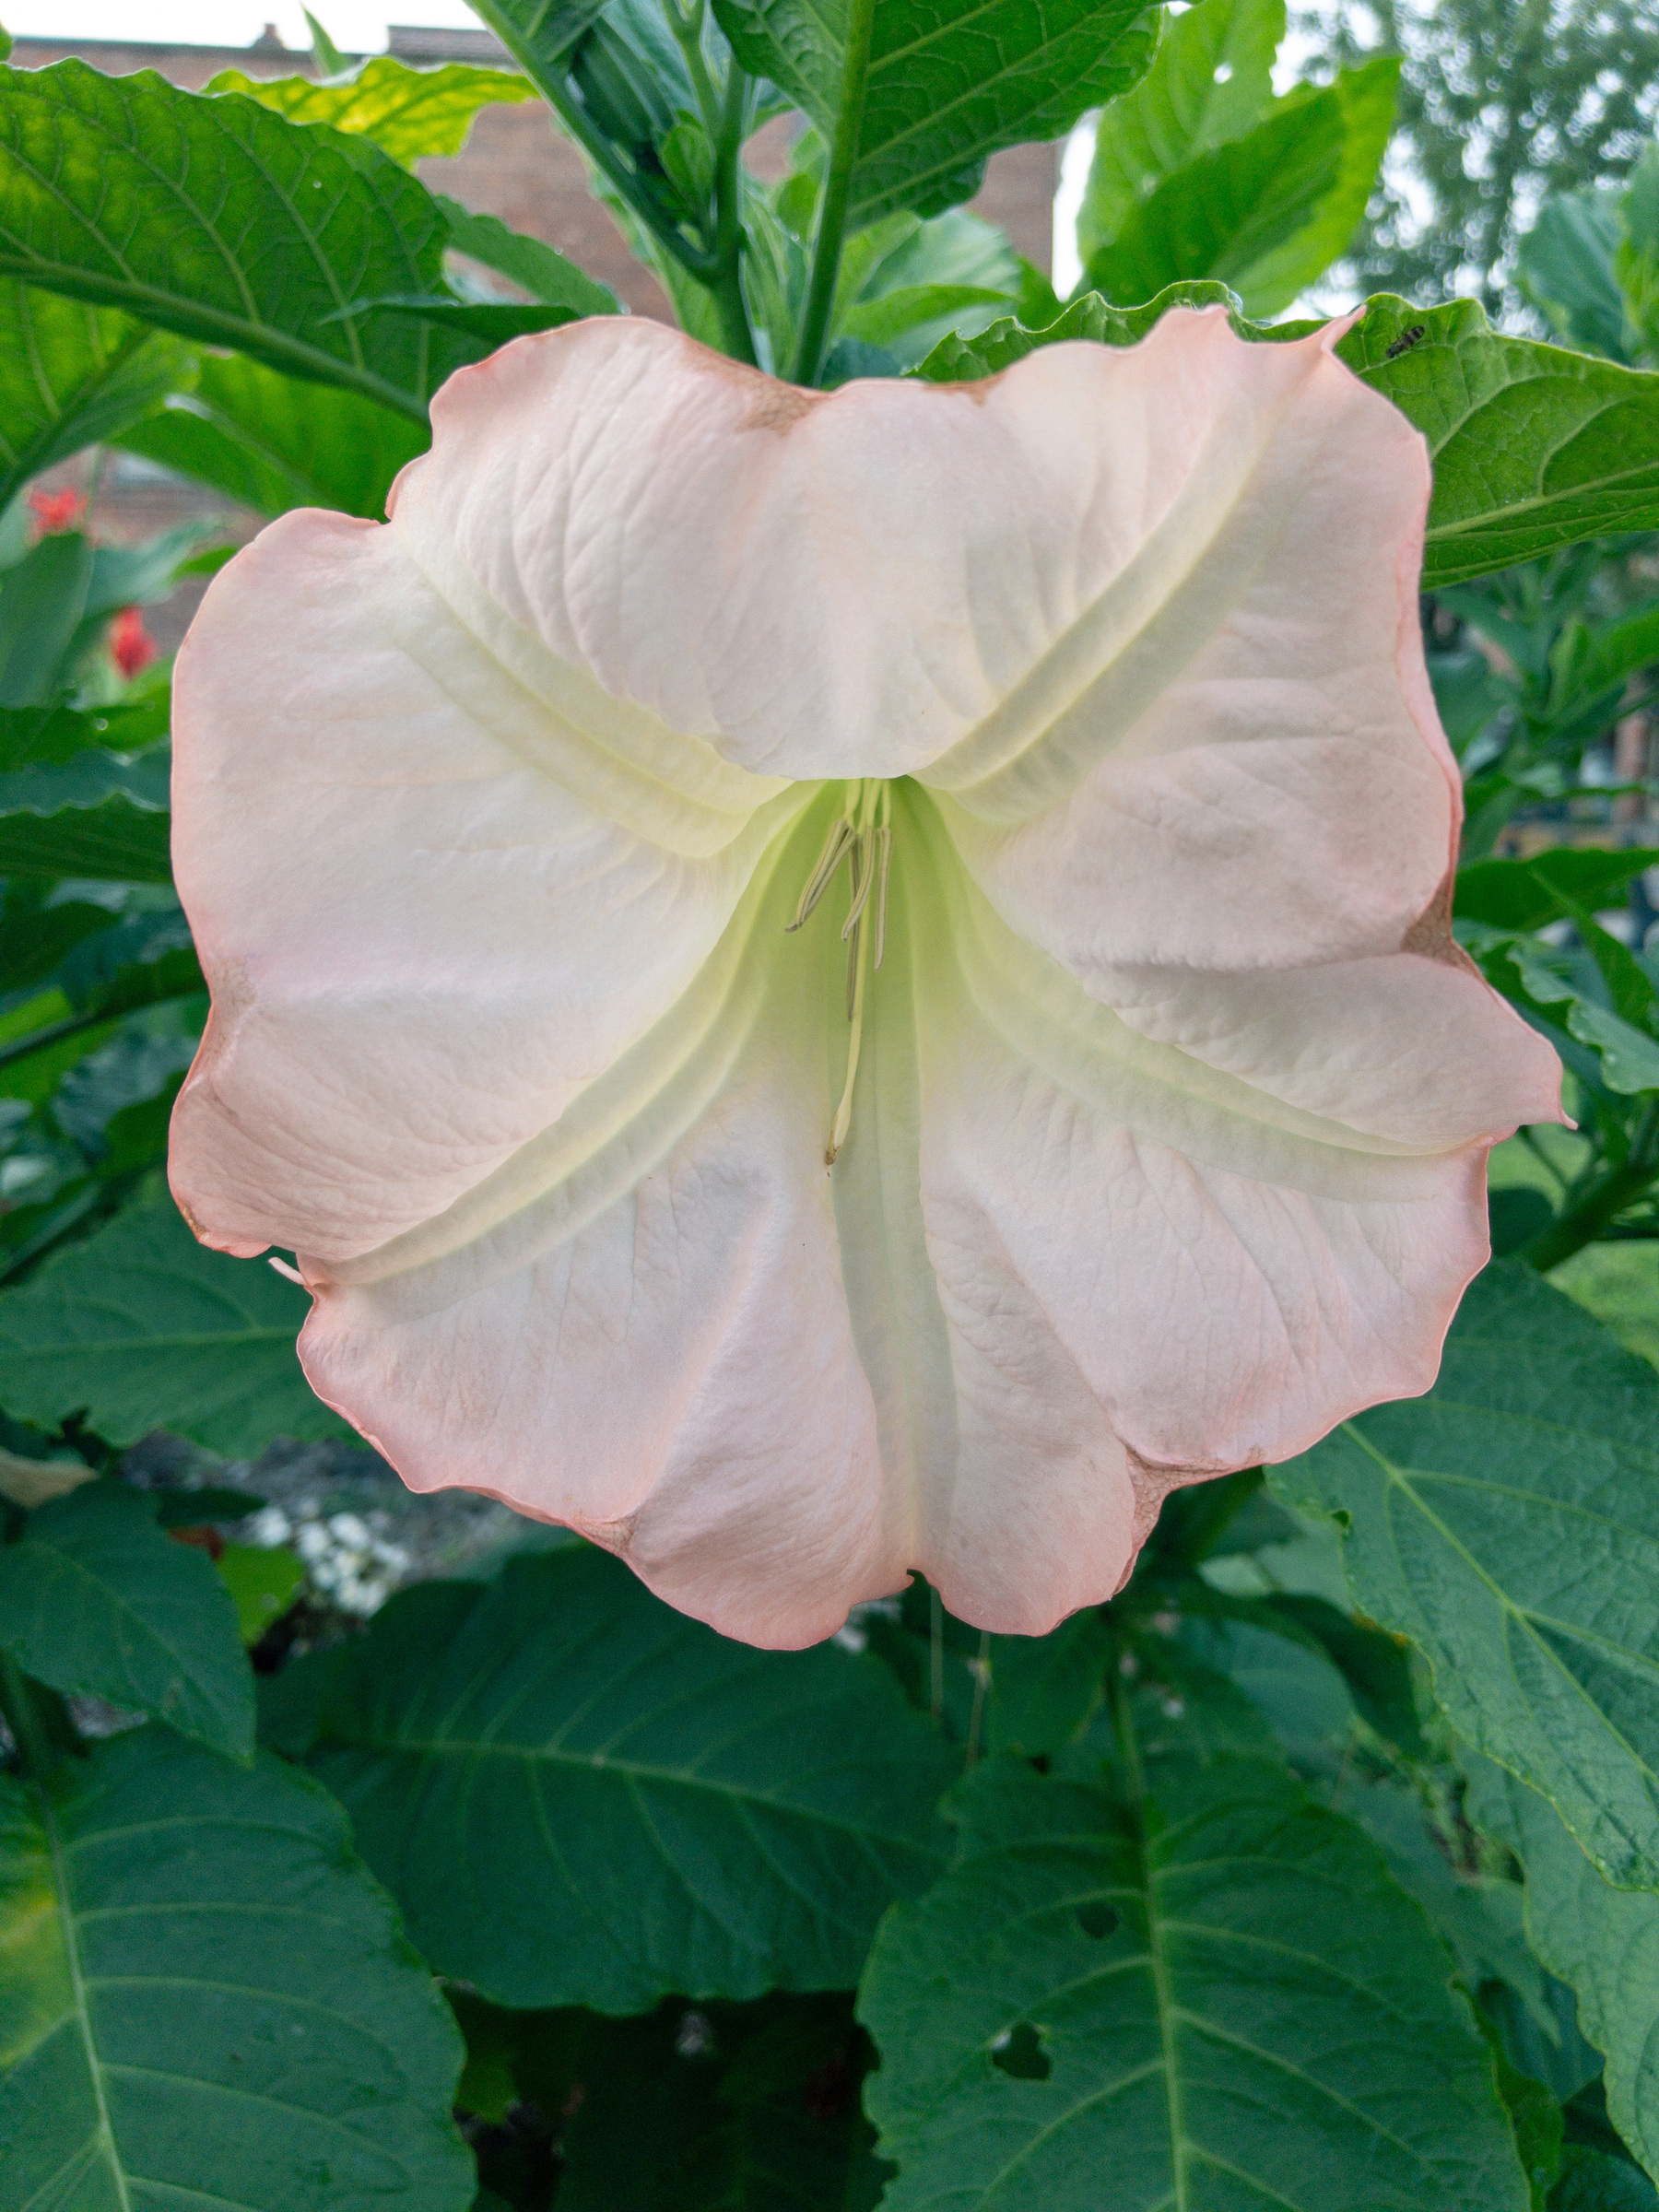 light pink and white trumpet flower